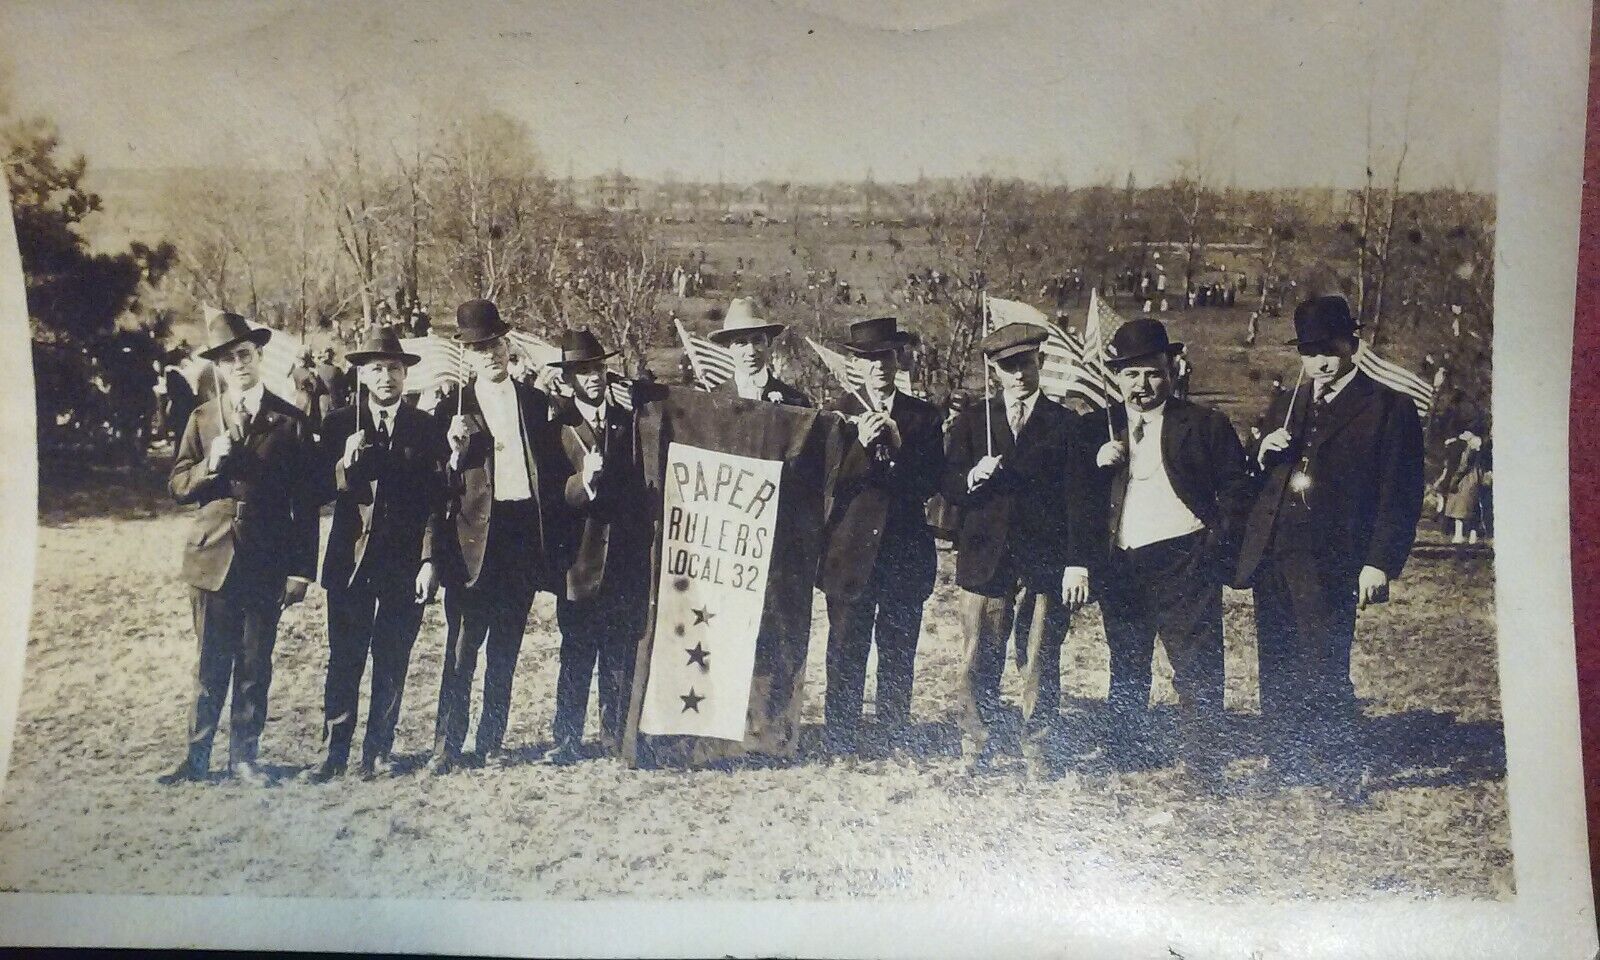 small 1910's Original Photo Members of PAPER RULERS LOCAL 32 Union out in Field